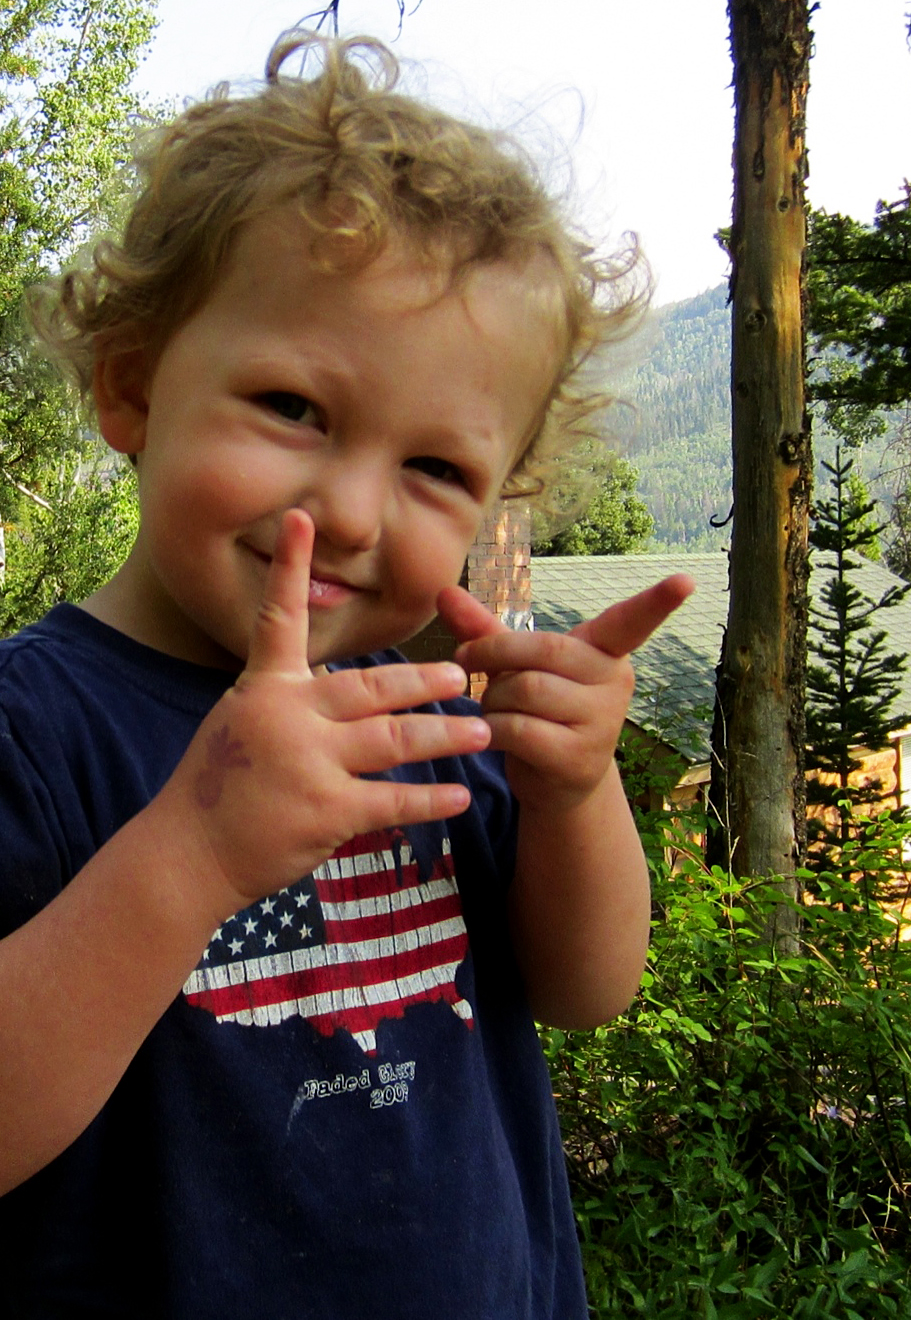 a small child making a peace sign with his hands